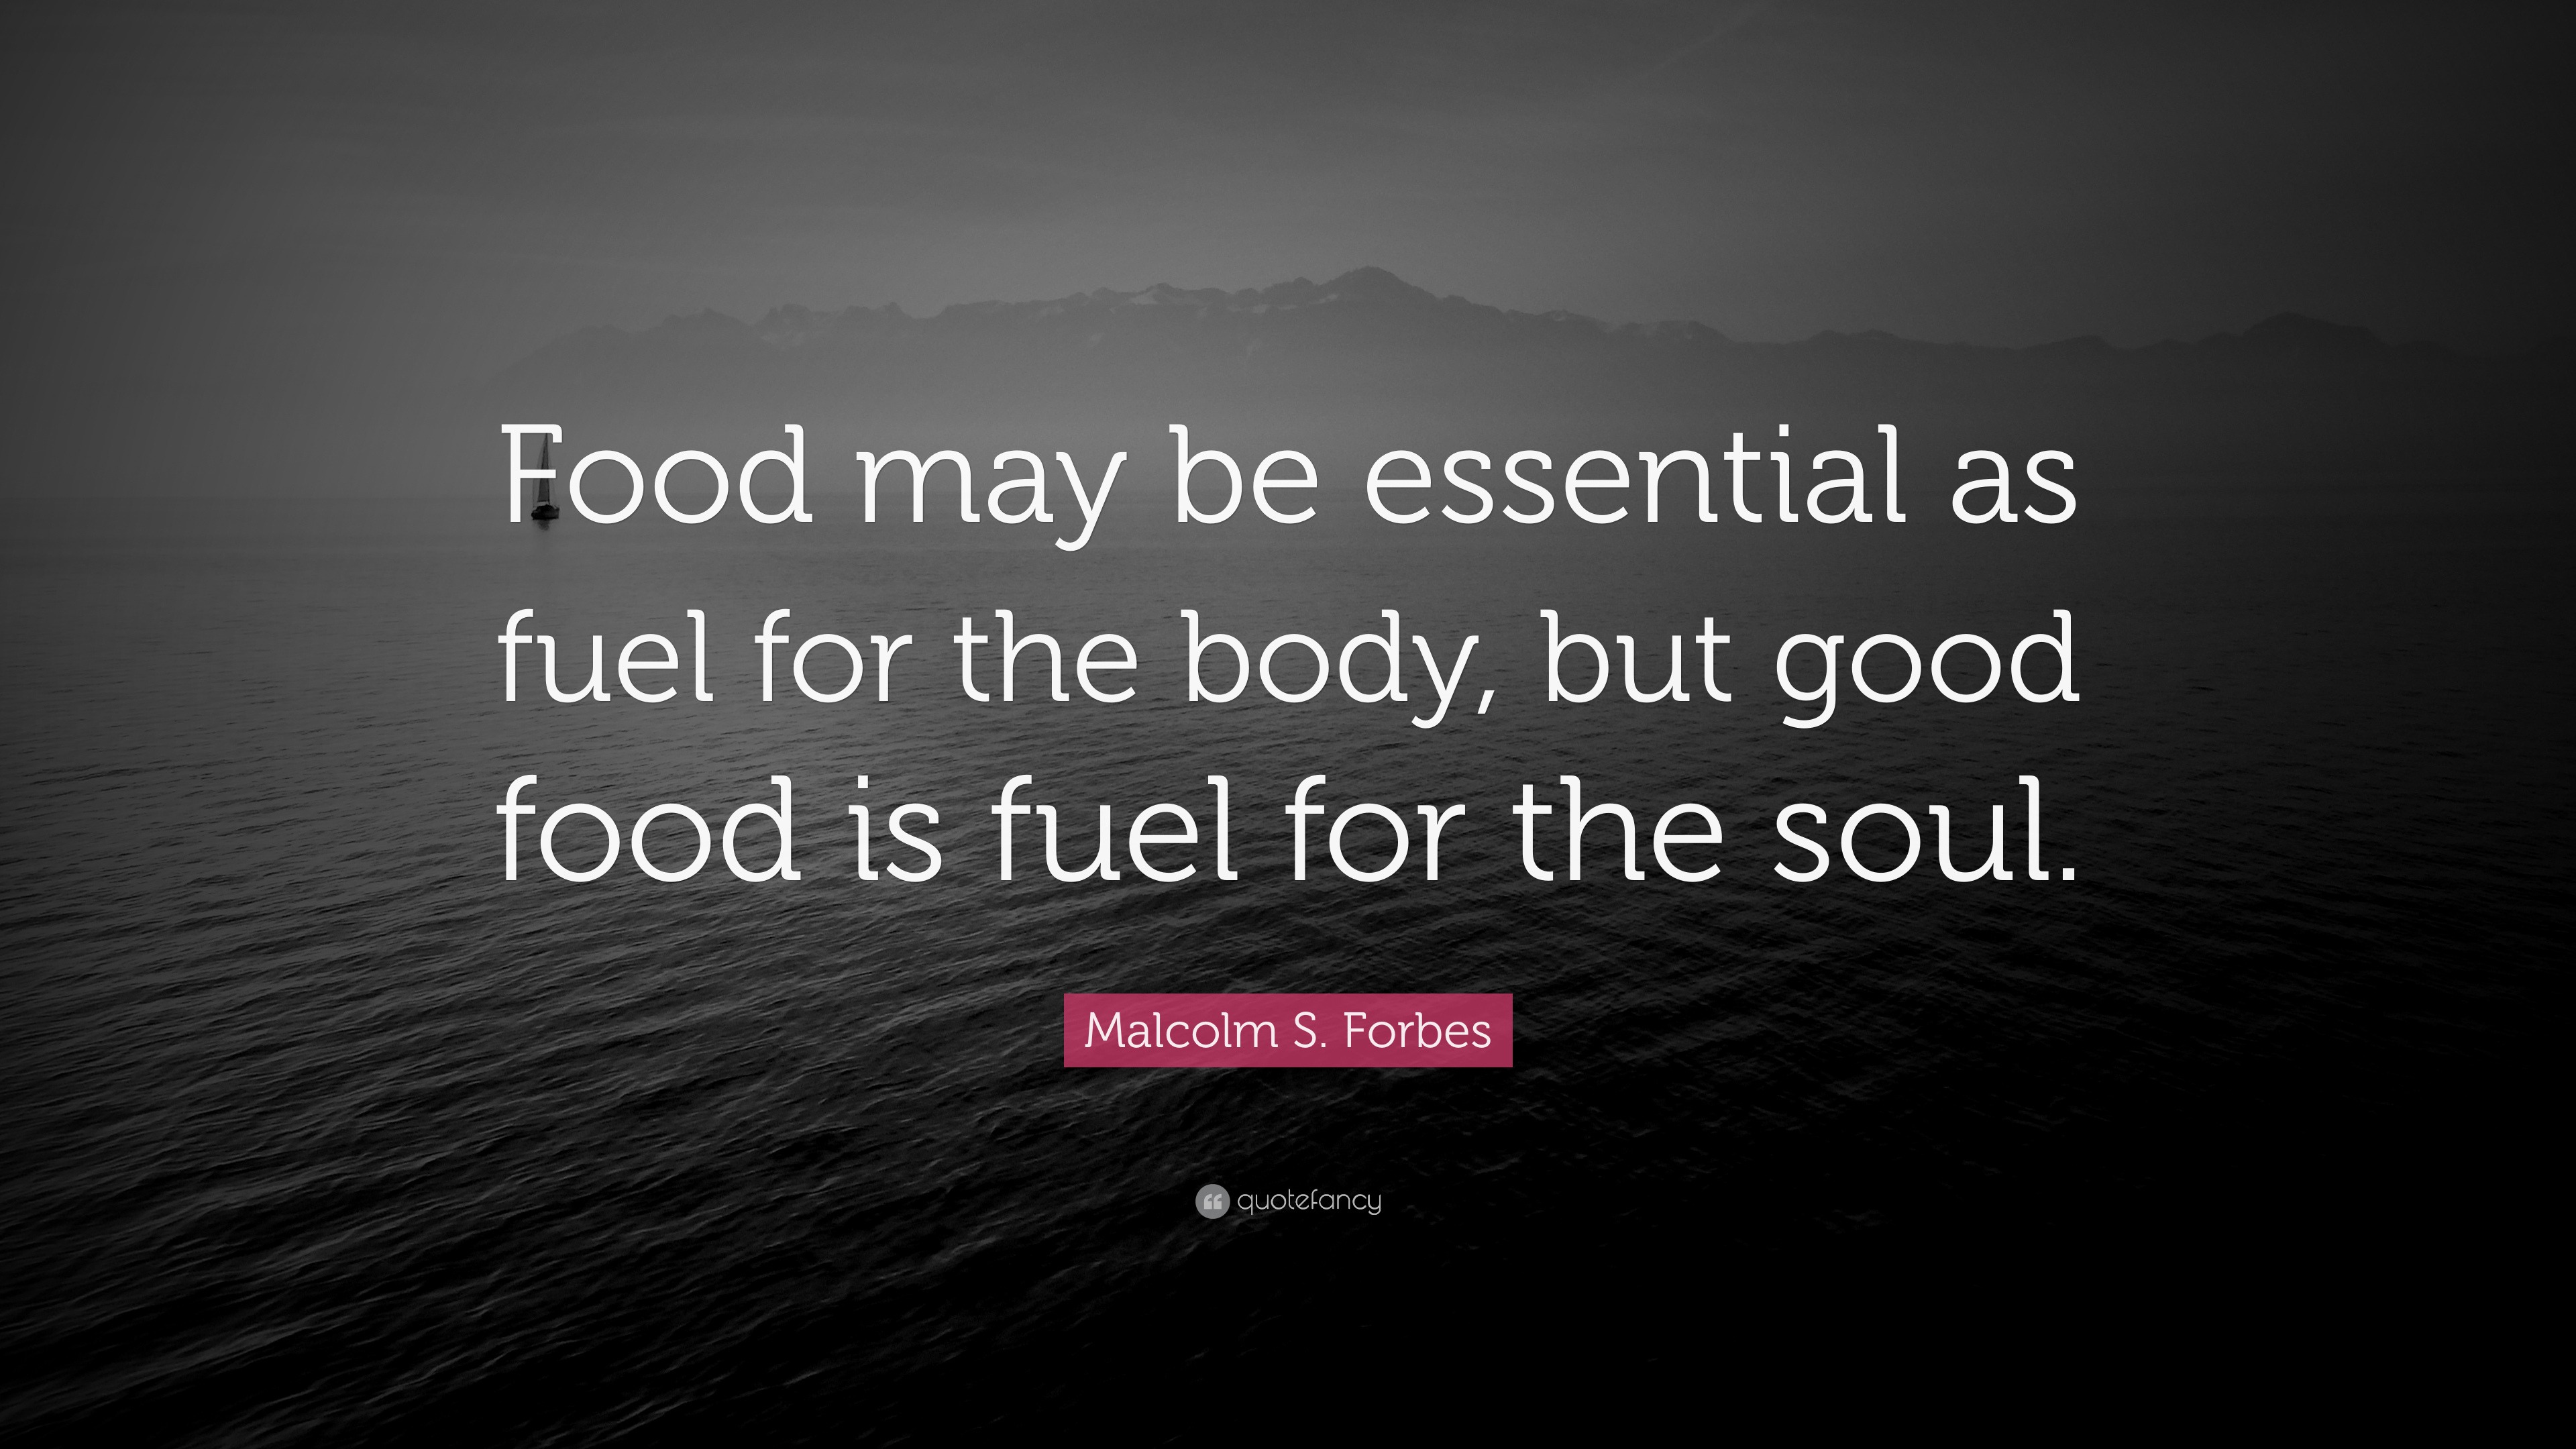 Malcolm S. Forbes Quote: “Food may be essential as fuel for the body